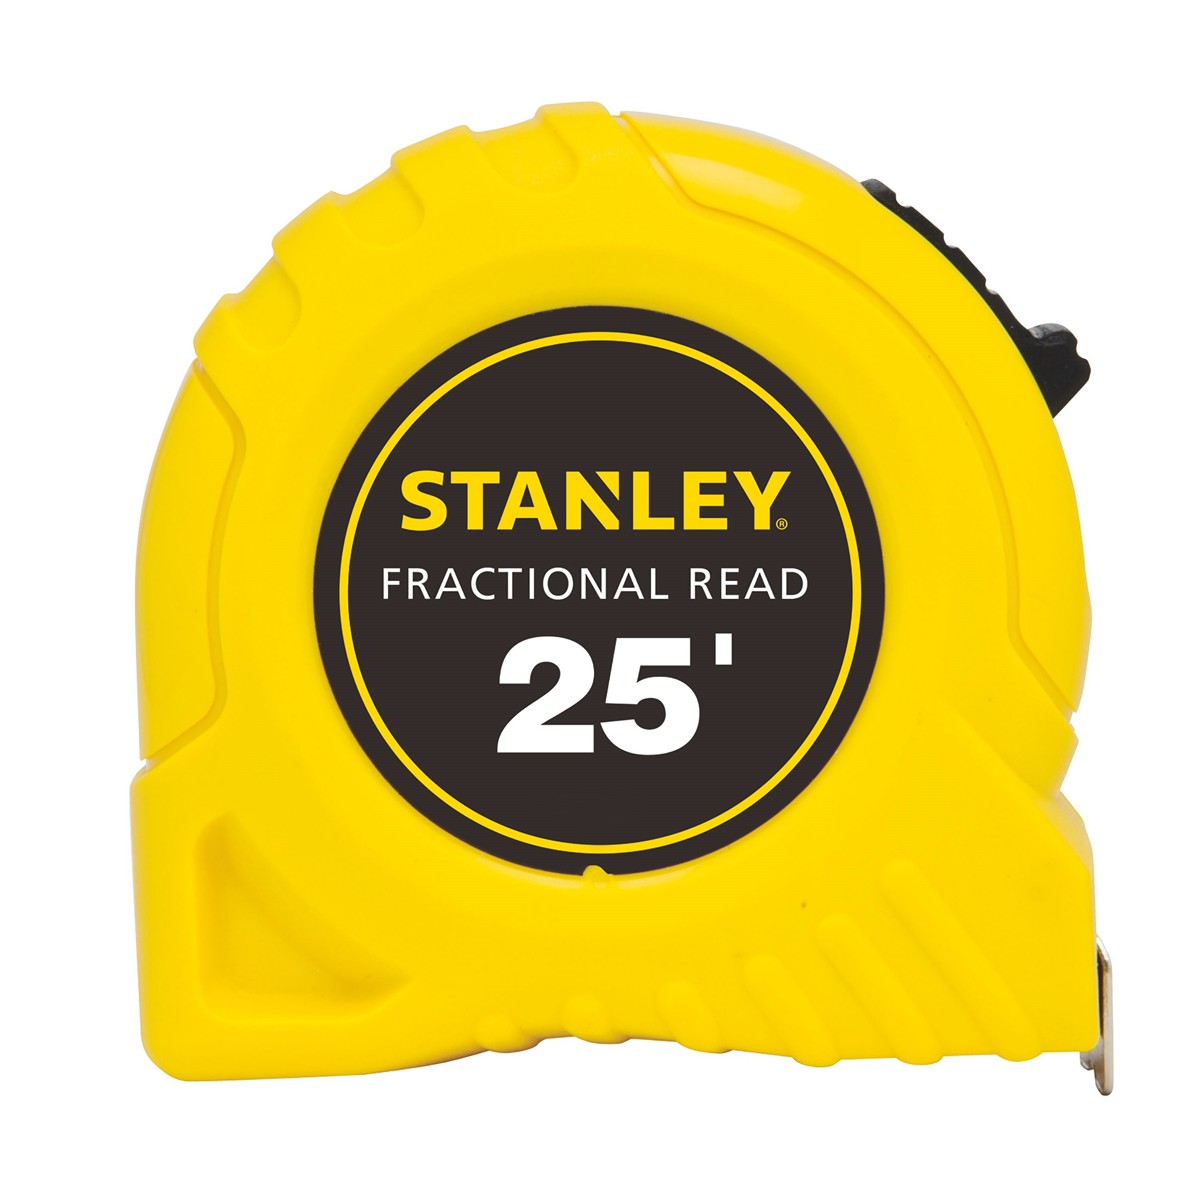 STANLEY 30-454 Measuring Tape, 25 ft L x 1 in W Blade, Steel Blade, Yellow